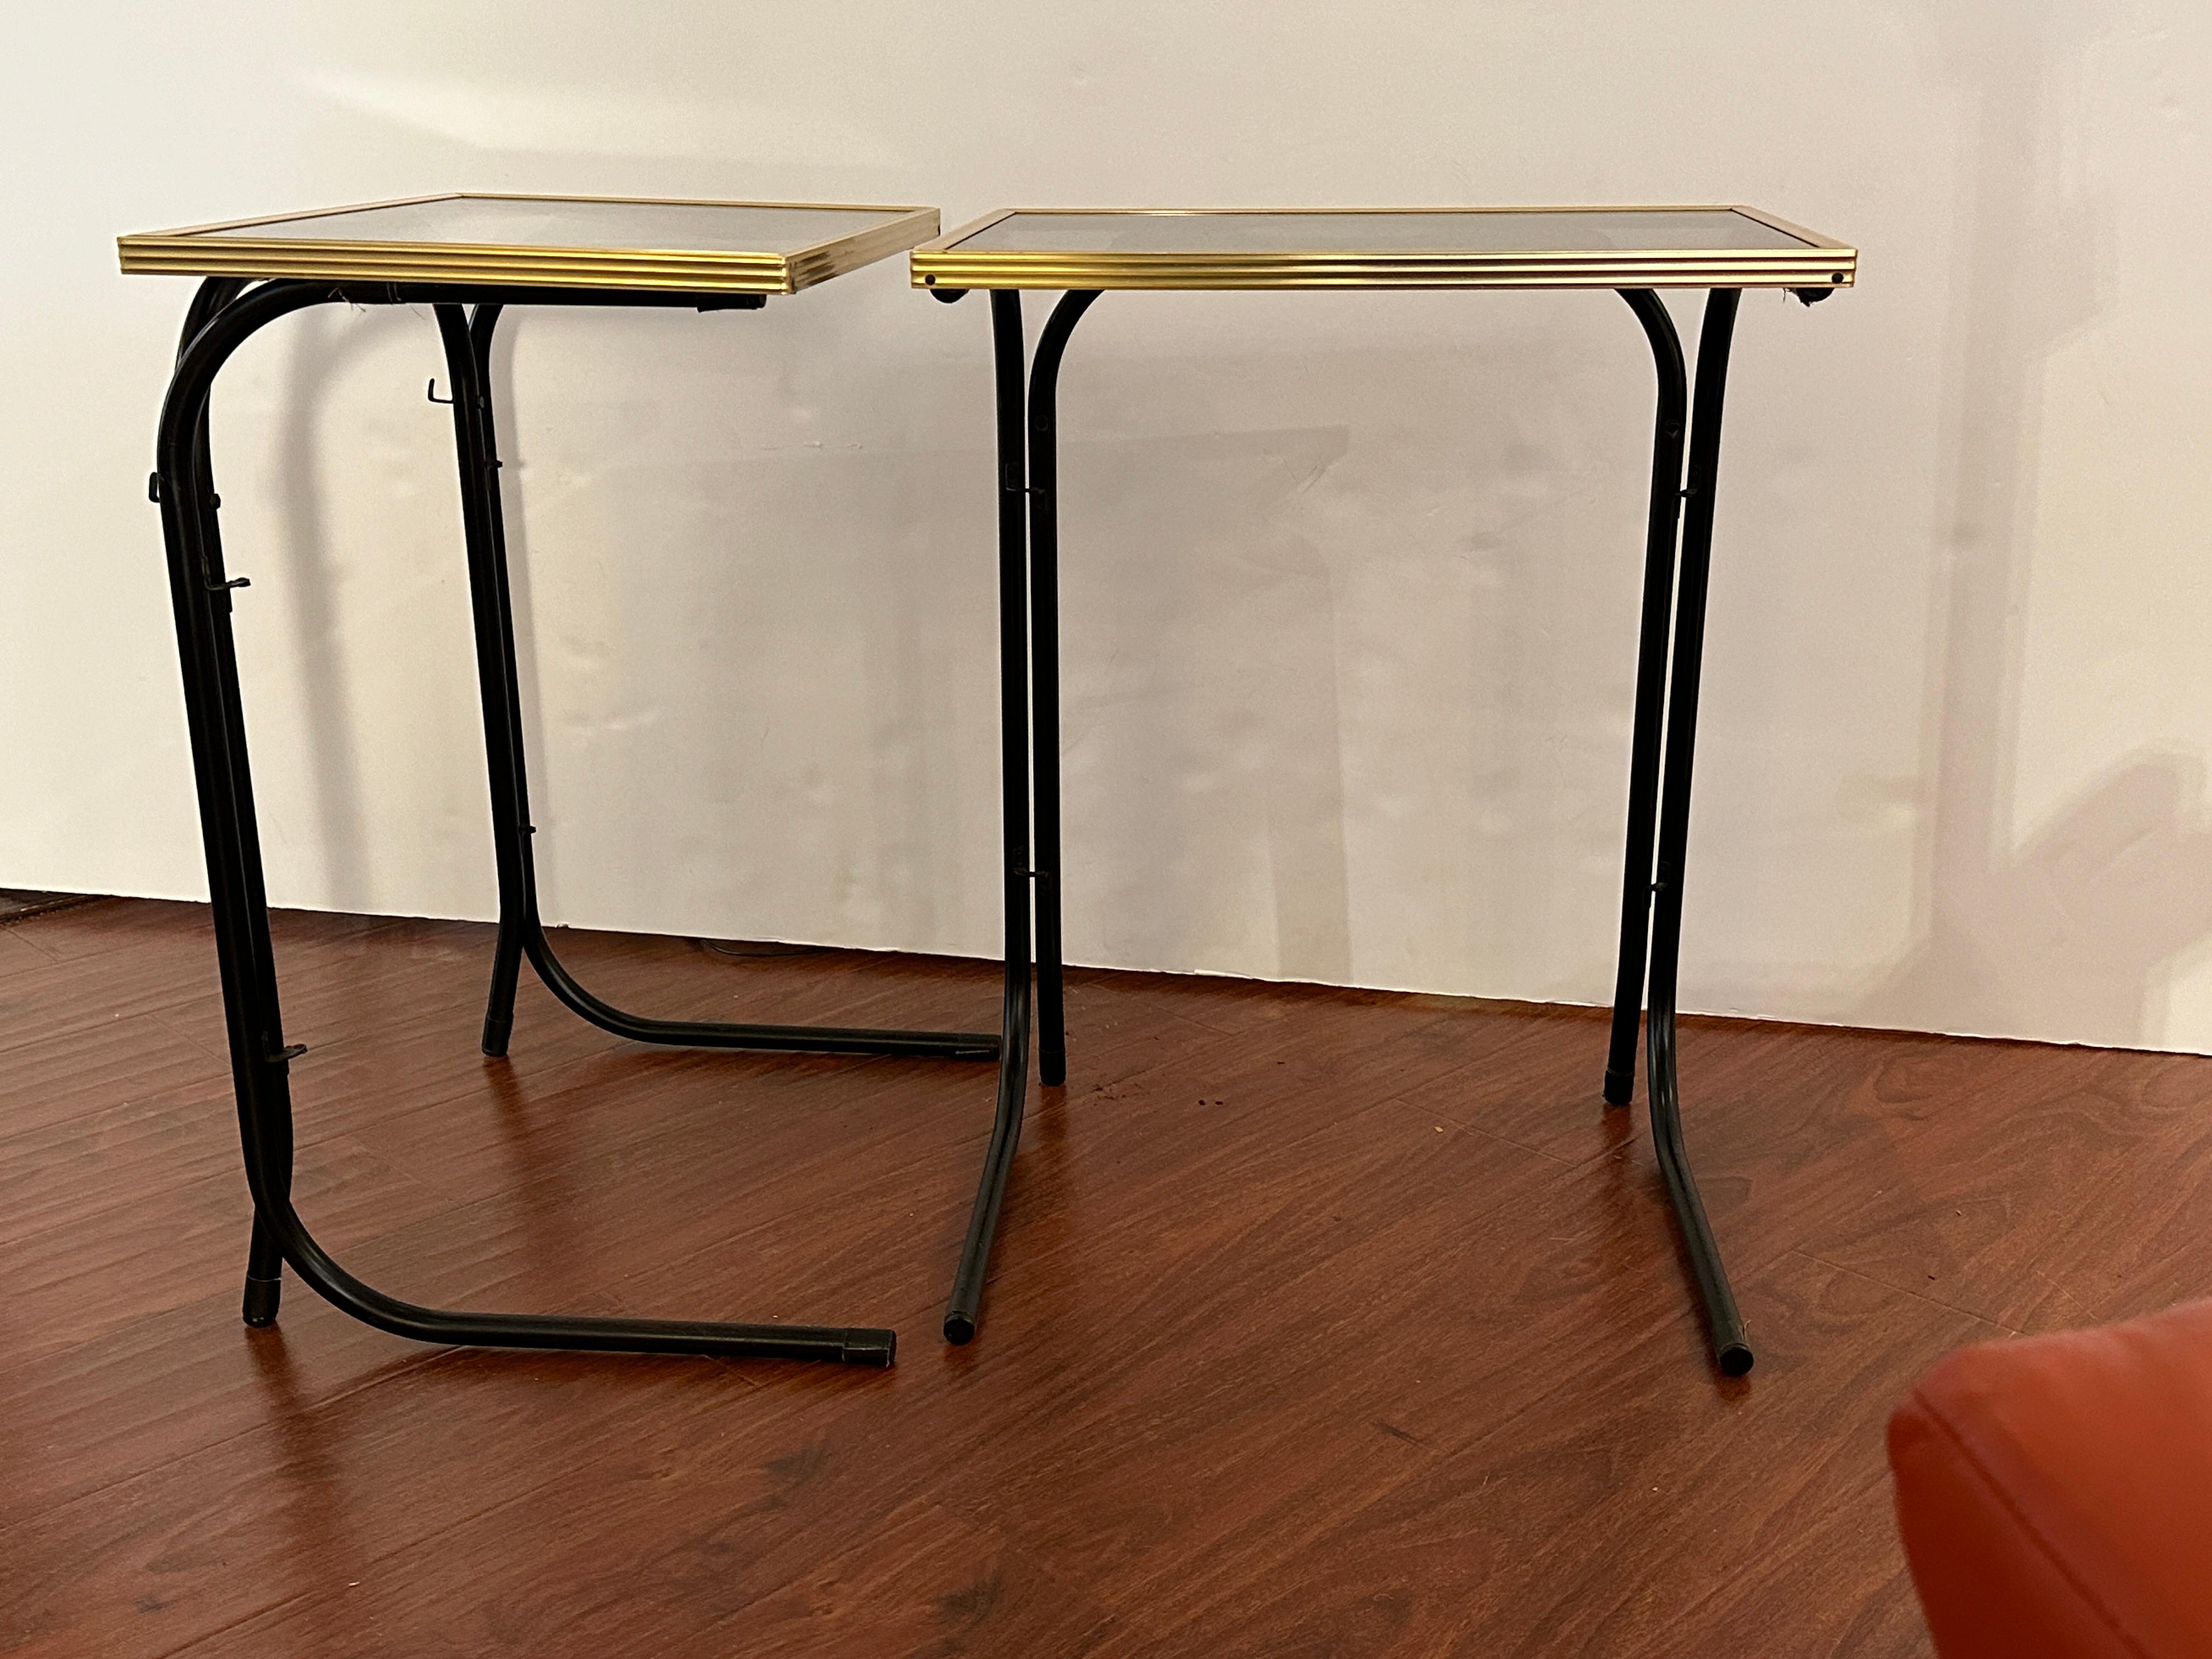 
This pair of brass and iron folding tables, combines style and functionality.  Each table features a tempered glass top framed by a sleek brass border, showcasing a clean three-line minimalist design. The folding feature adds to their